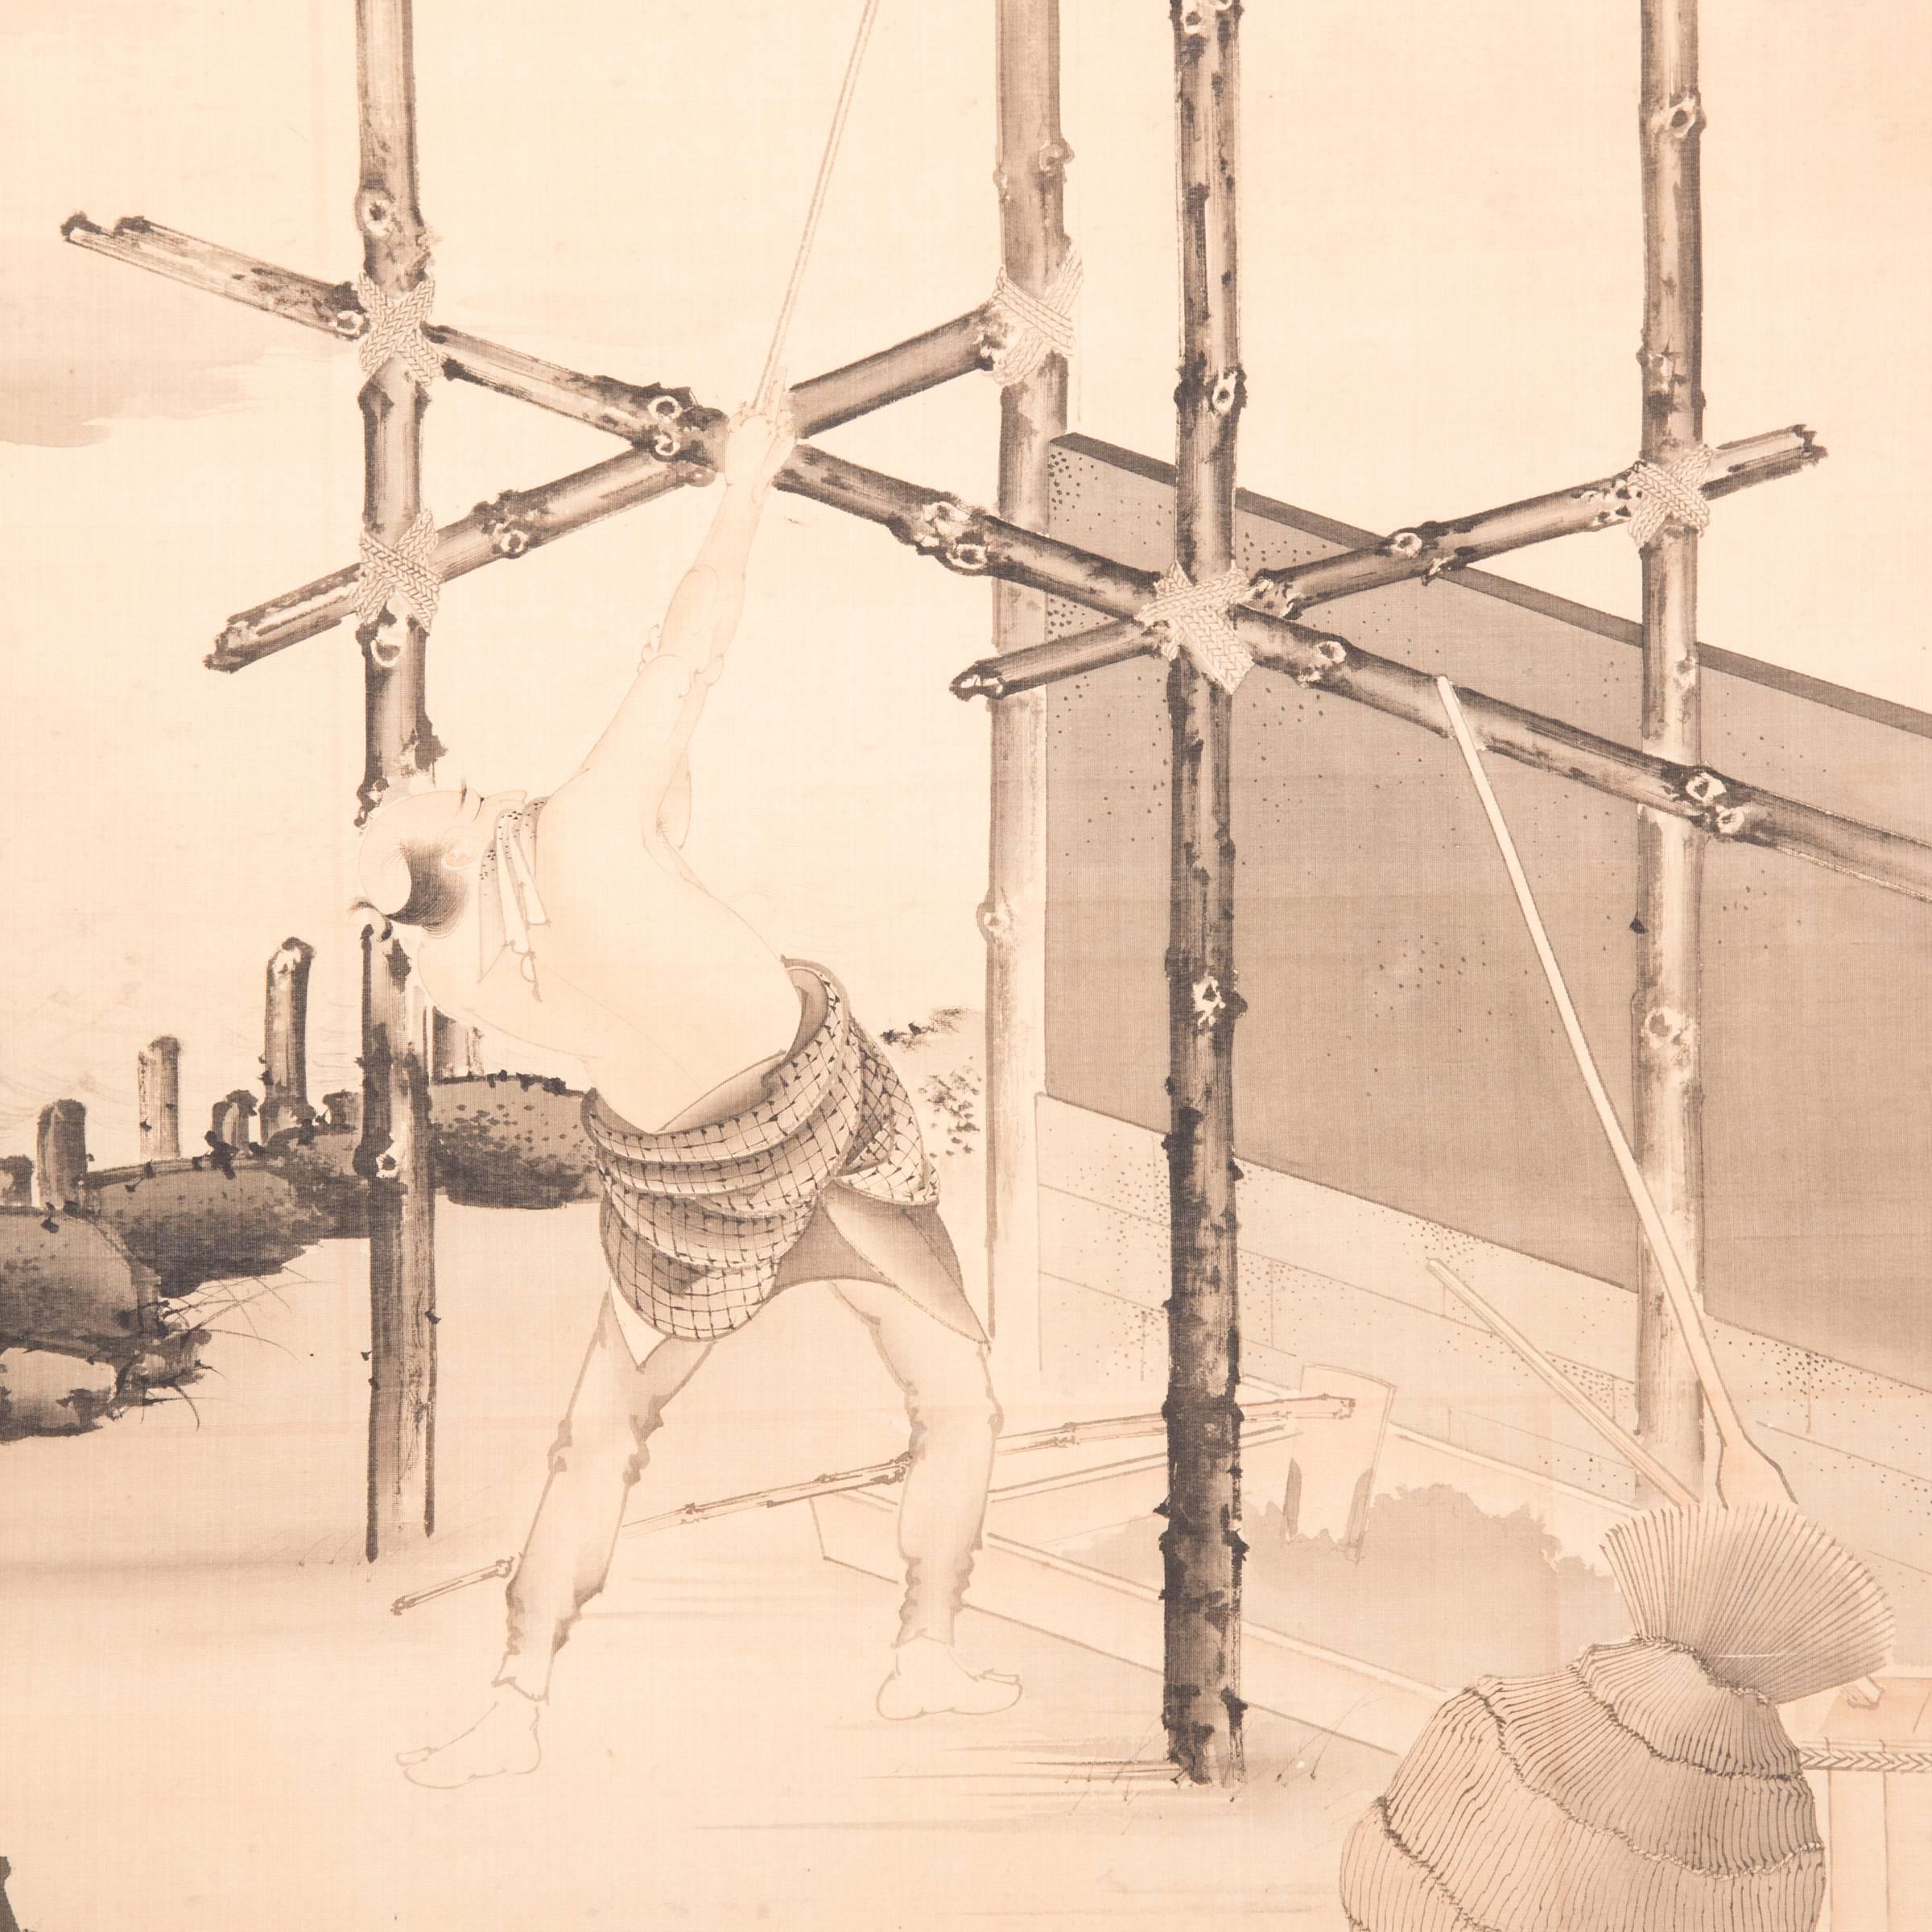 During Japan’s Meiji period (1868–1912), artists were exposed to Western art through more open diplomatic and trading relations. Artists began experimenting with unfamiliar techniques such as also modeling and pictorial perspective, incorporating